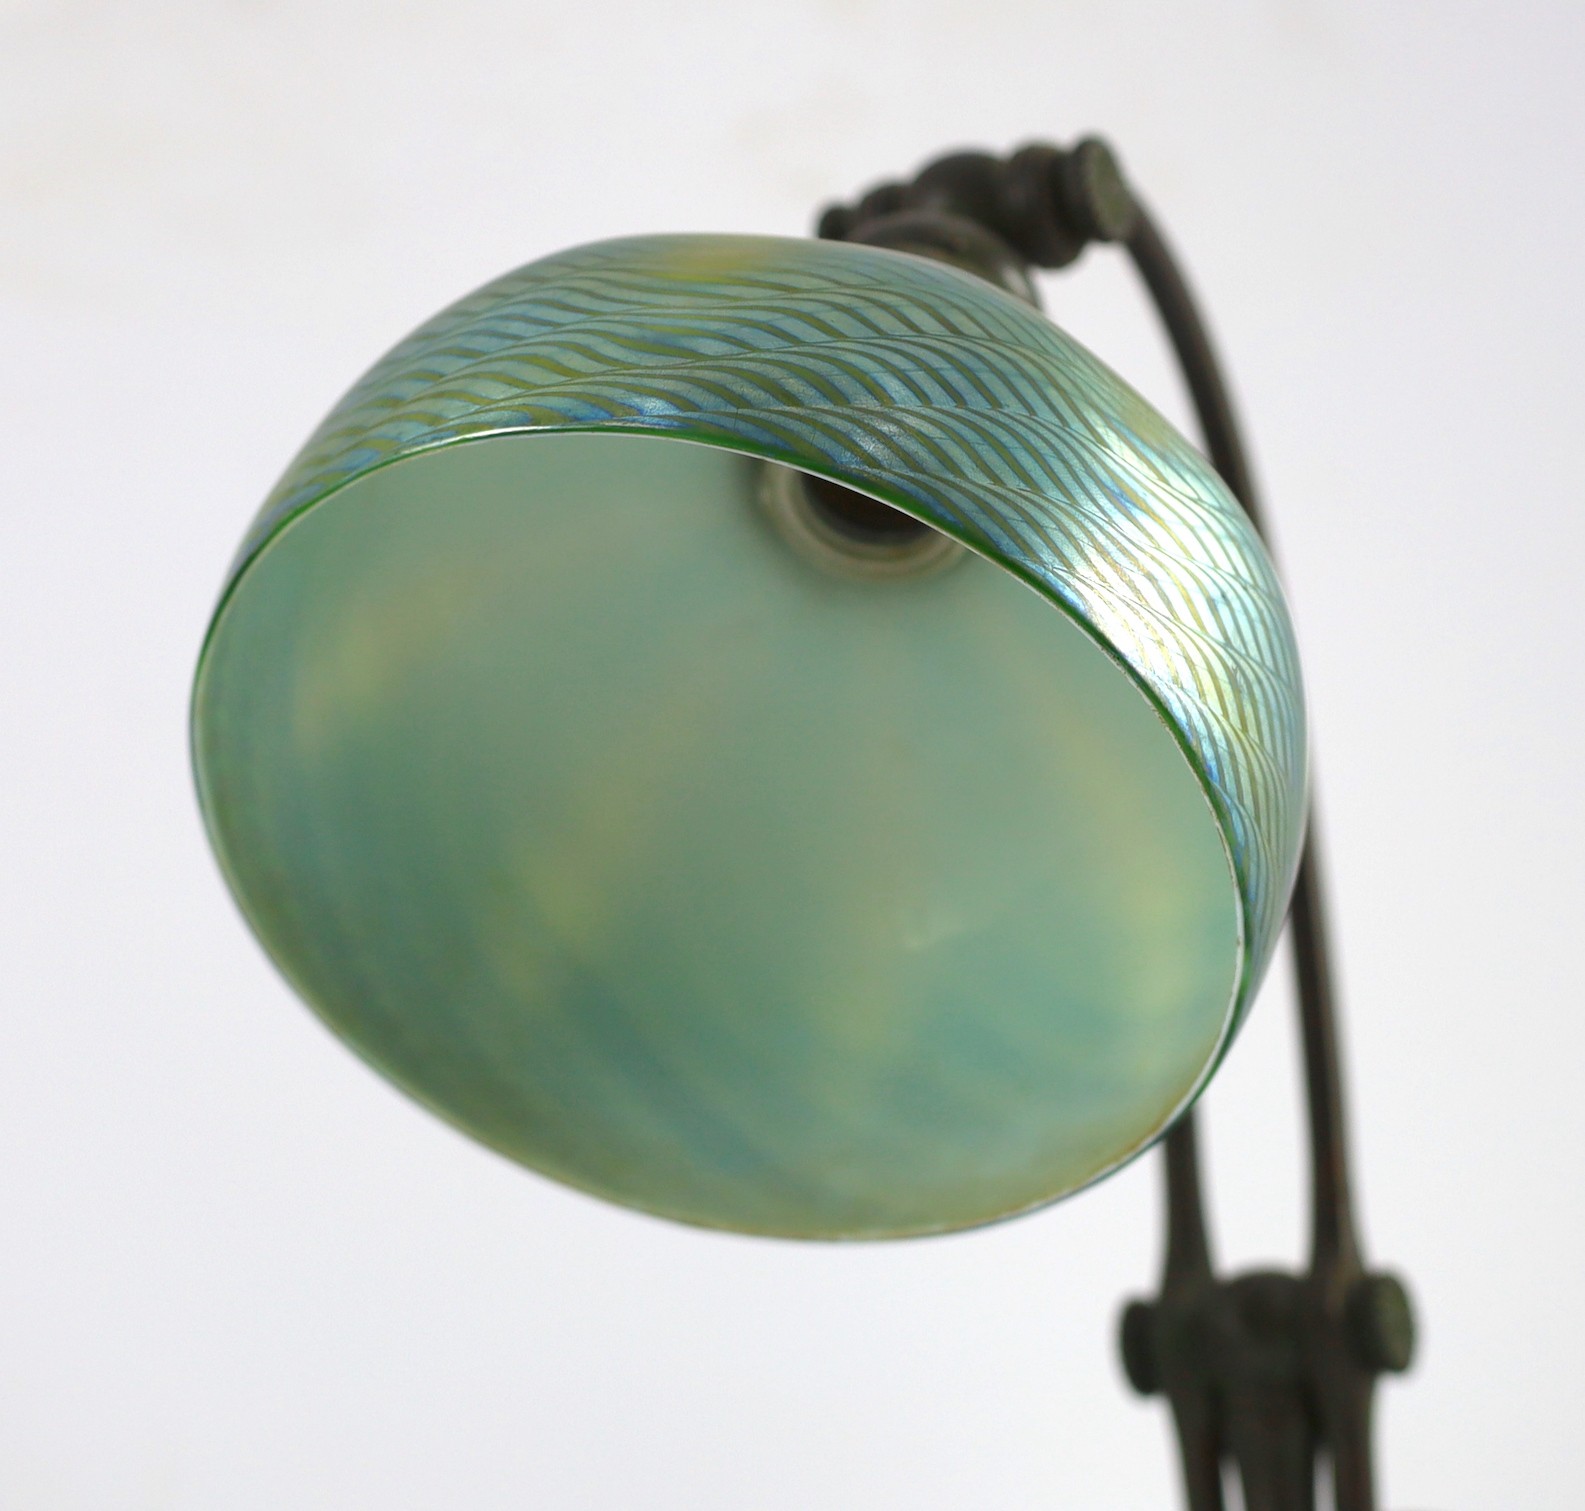 Tiffany Studios, a counter-balance patinated bronze desk lamp with ‘favrile’ glass shade, c.1905, maximum height 41cm, shade 17.3cm diameter